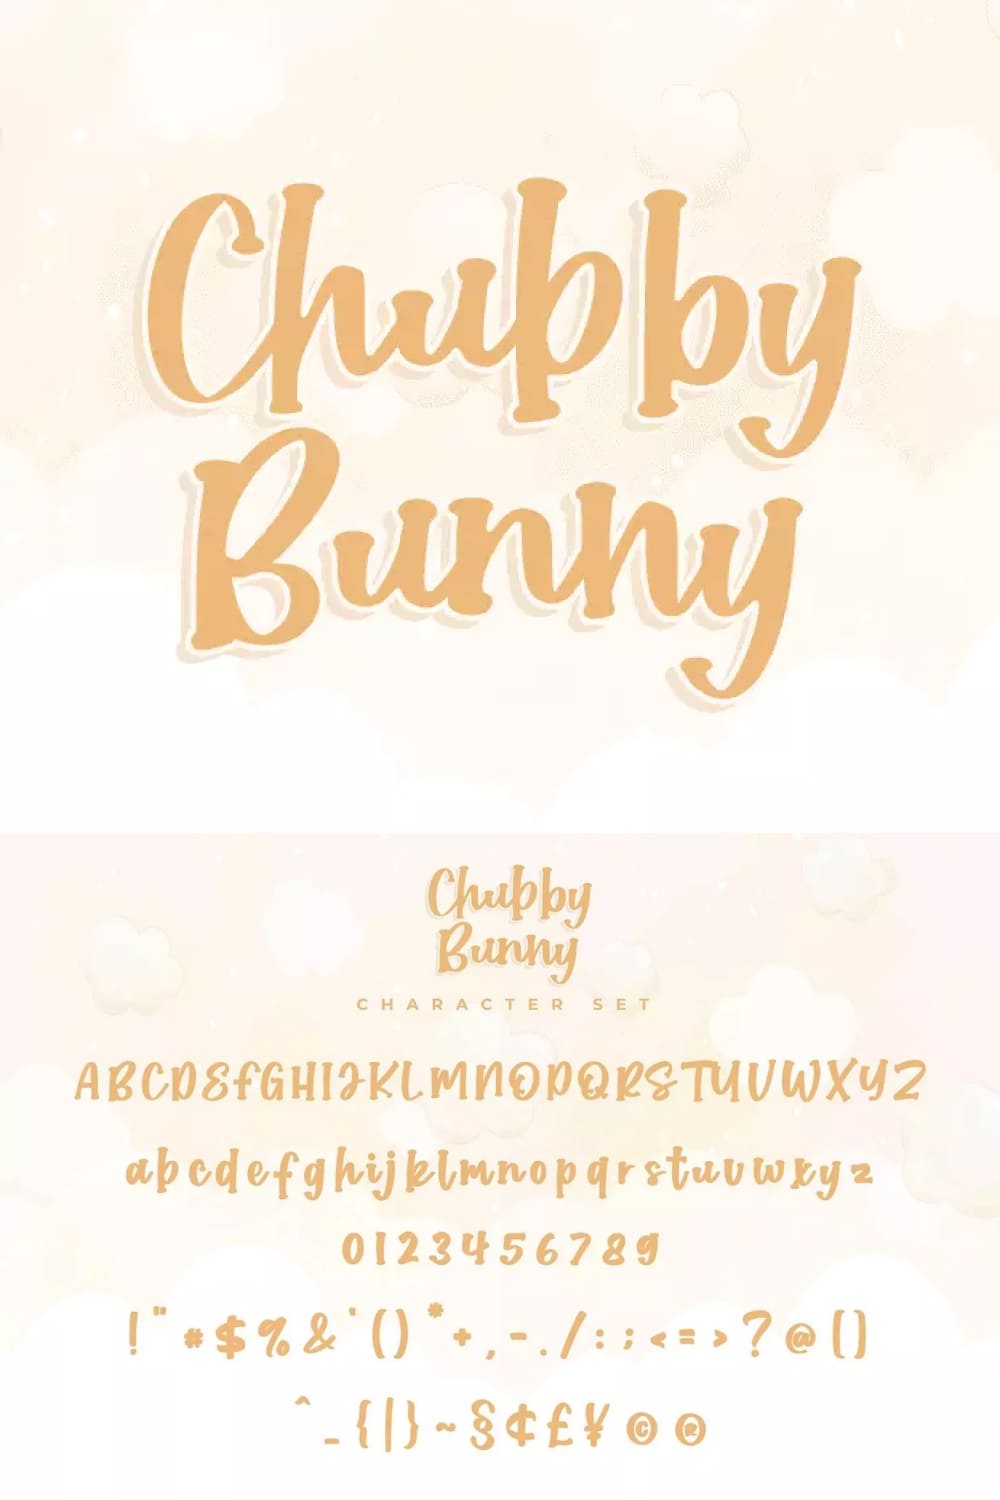 Chubby Bunny Font name and alphabetical representation.